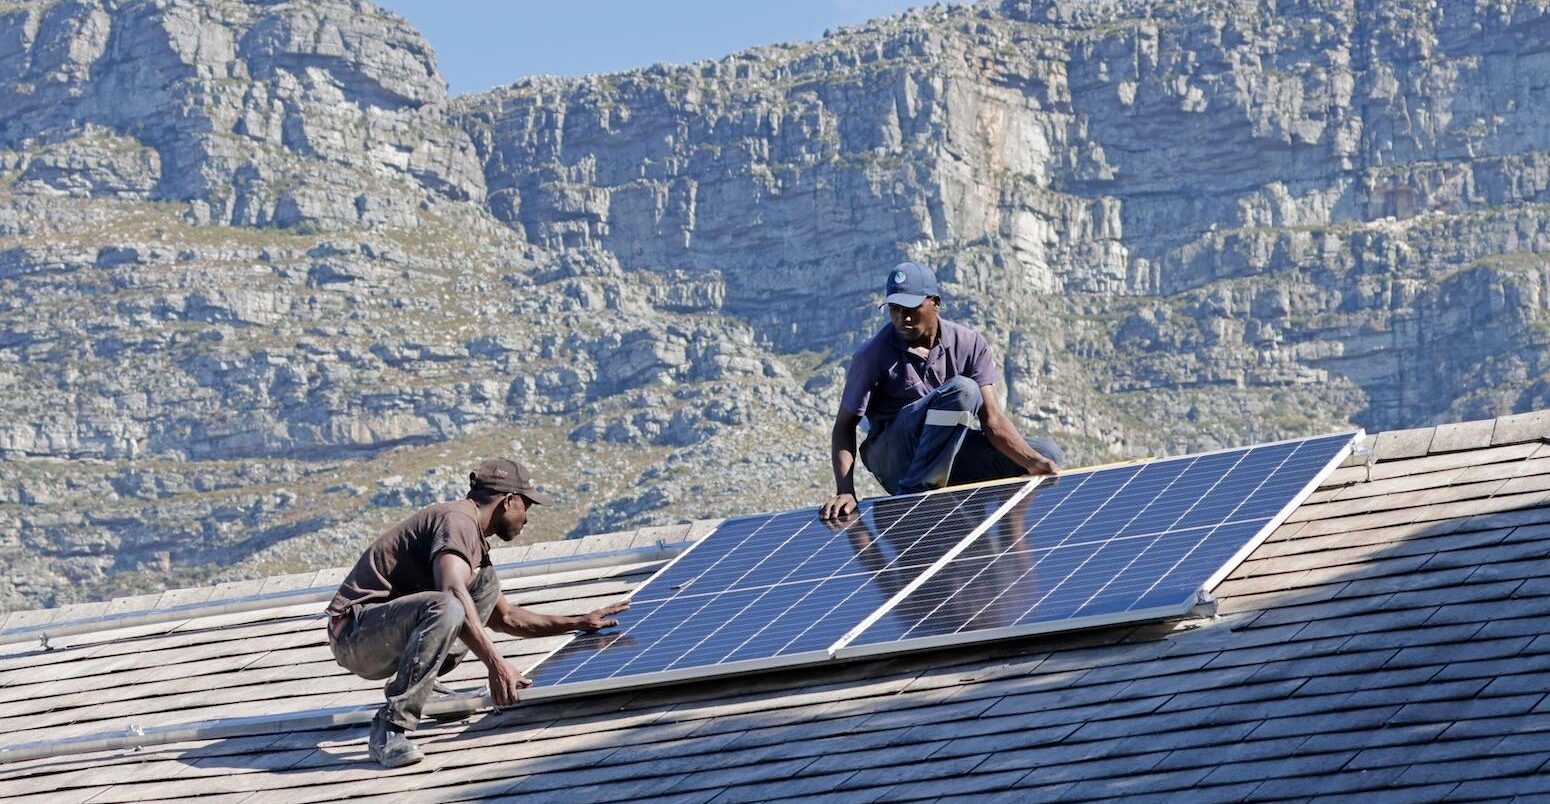 Two men install a solar panel on a roof in South Africa.